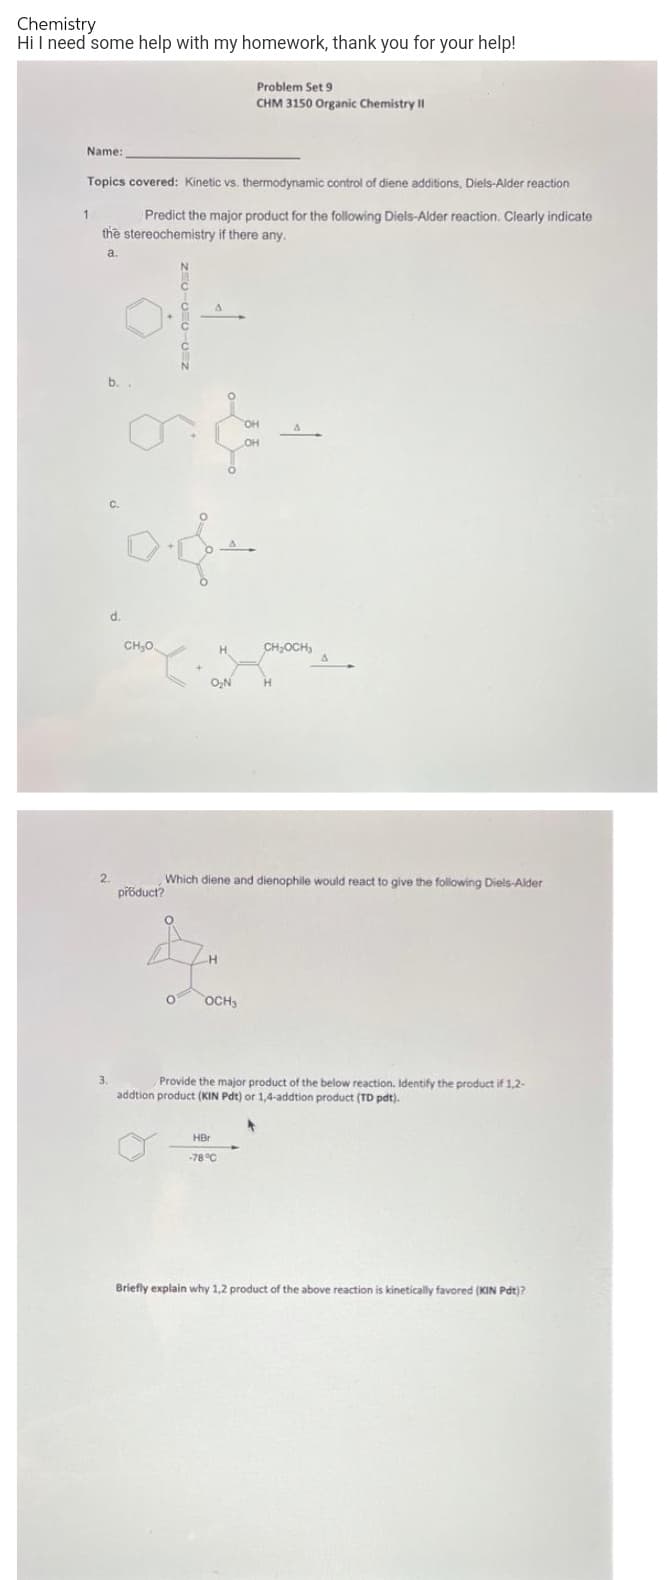 Chemistry
Hi I need some help with my homework, thank you for your help!
Problem Set 9
CHM 3150 Organic Chemistry II
Name:
Topics covered: Kinetic vs. thermodynamic control of diene additions, Diels-Alder reaction
Predict the major product for the following Diels-Alder reaction. Clearly indicate
the stereochemistry if there any.
1
a.
b.
C.
d.
CH,0.
CH;OCH,
O,N
H.
Which diene and dienophile would react to give the following Diels-Alder
přoduct?
OCH
3.
Provide the major product of the below reaction. Identify the product if 1,2-
addtion product (KIN Pdt) or 1,4-addtion product (TD pdt).
HBr
-78 °C
Briefly explain why 1.2 product of the above reaction is kinetically favored (KIN Pdt)?
